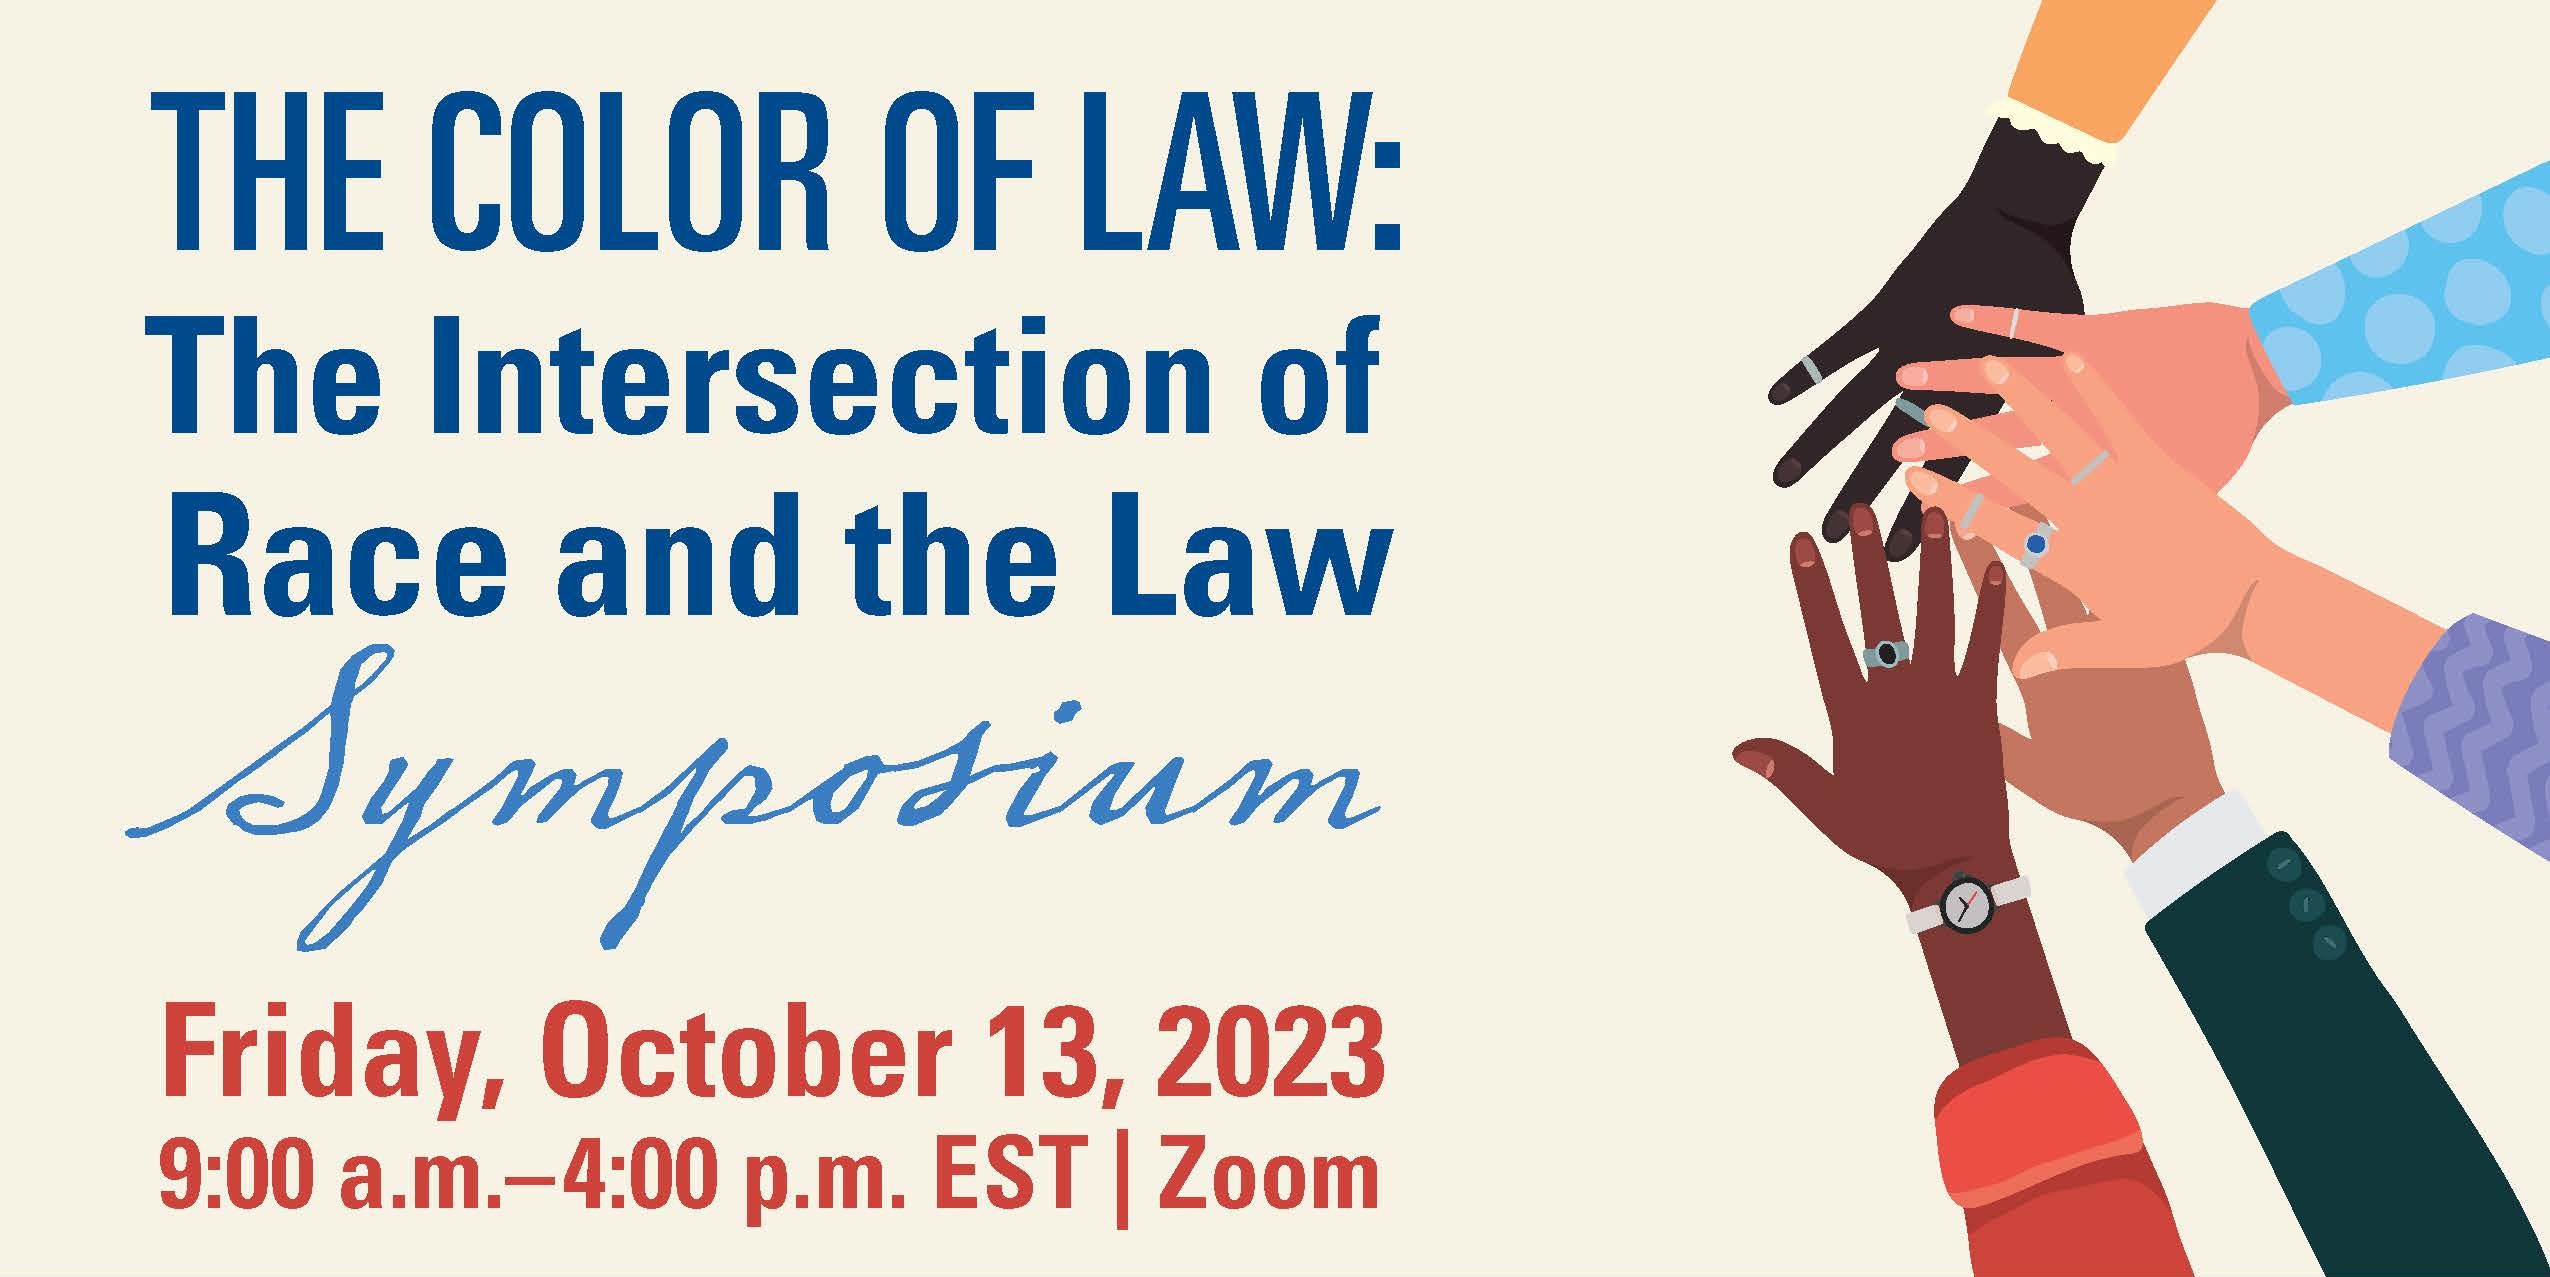 2023 The Color of Law: the Intersection of Race and the Law